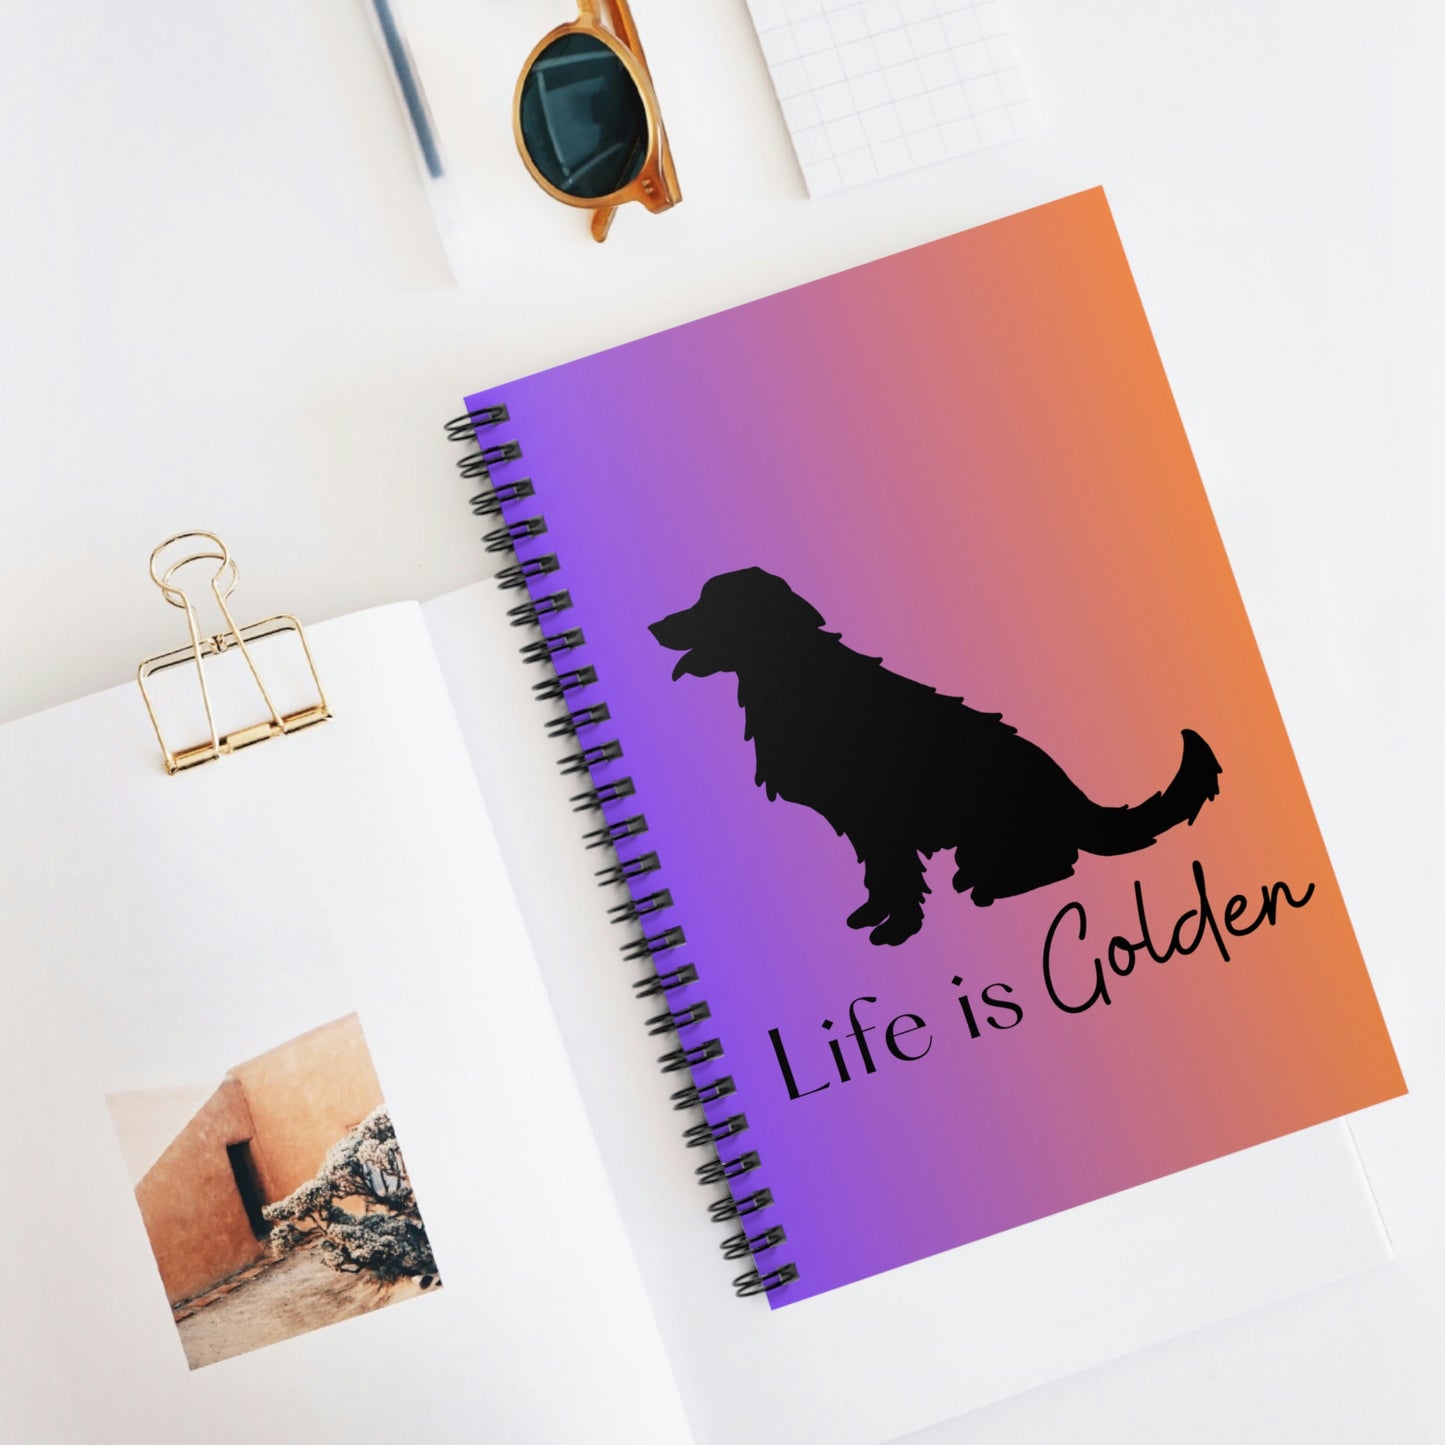 Life is Golden My Friends Spiral Notebook (Purple/Orange Ombre) - Ruled Line